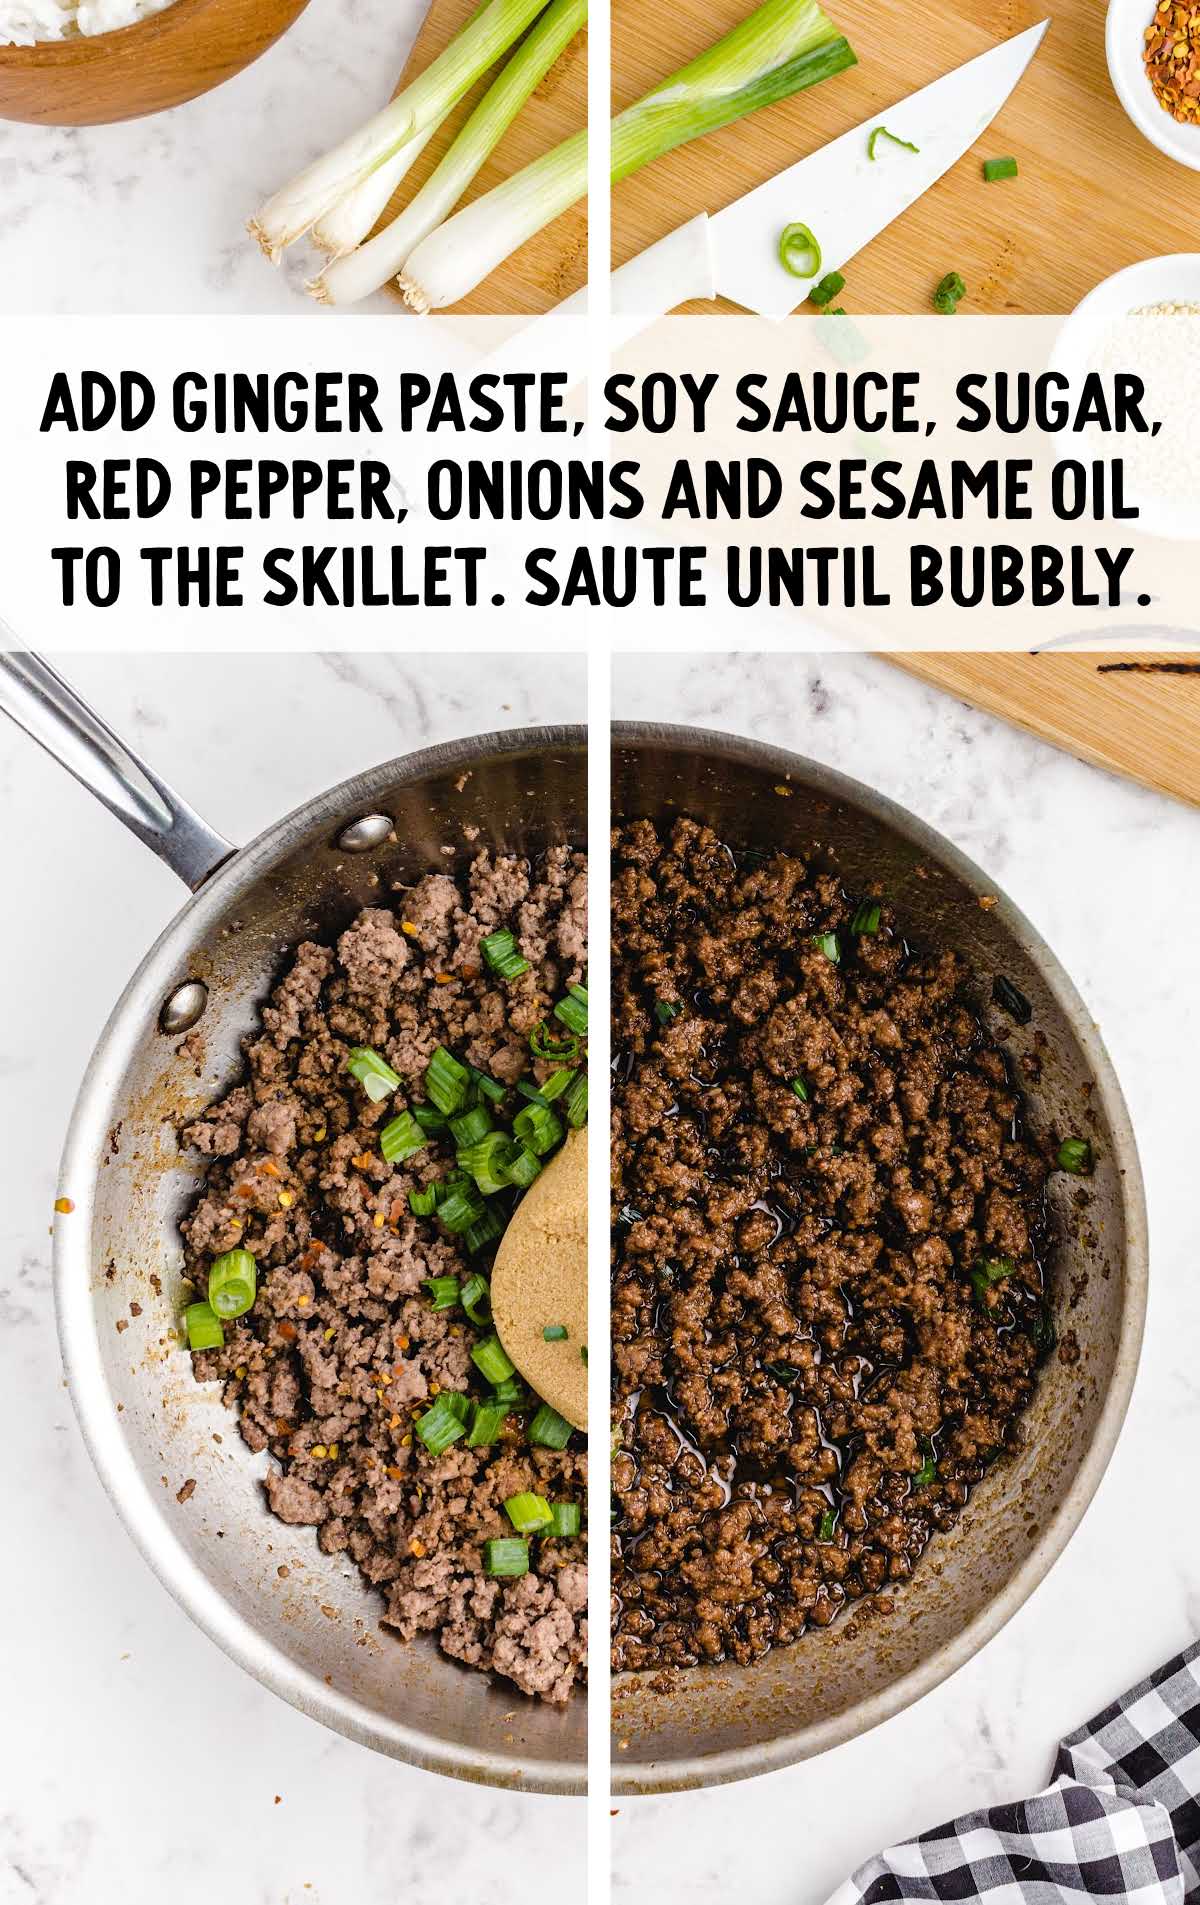 ganger paste, soy sauce, sugar, red pepper, onions, and sesame oil placed in a skillet